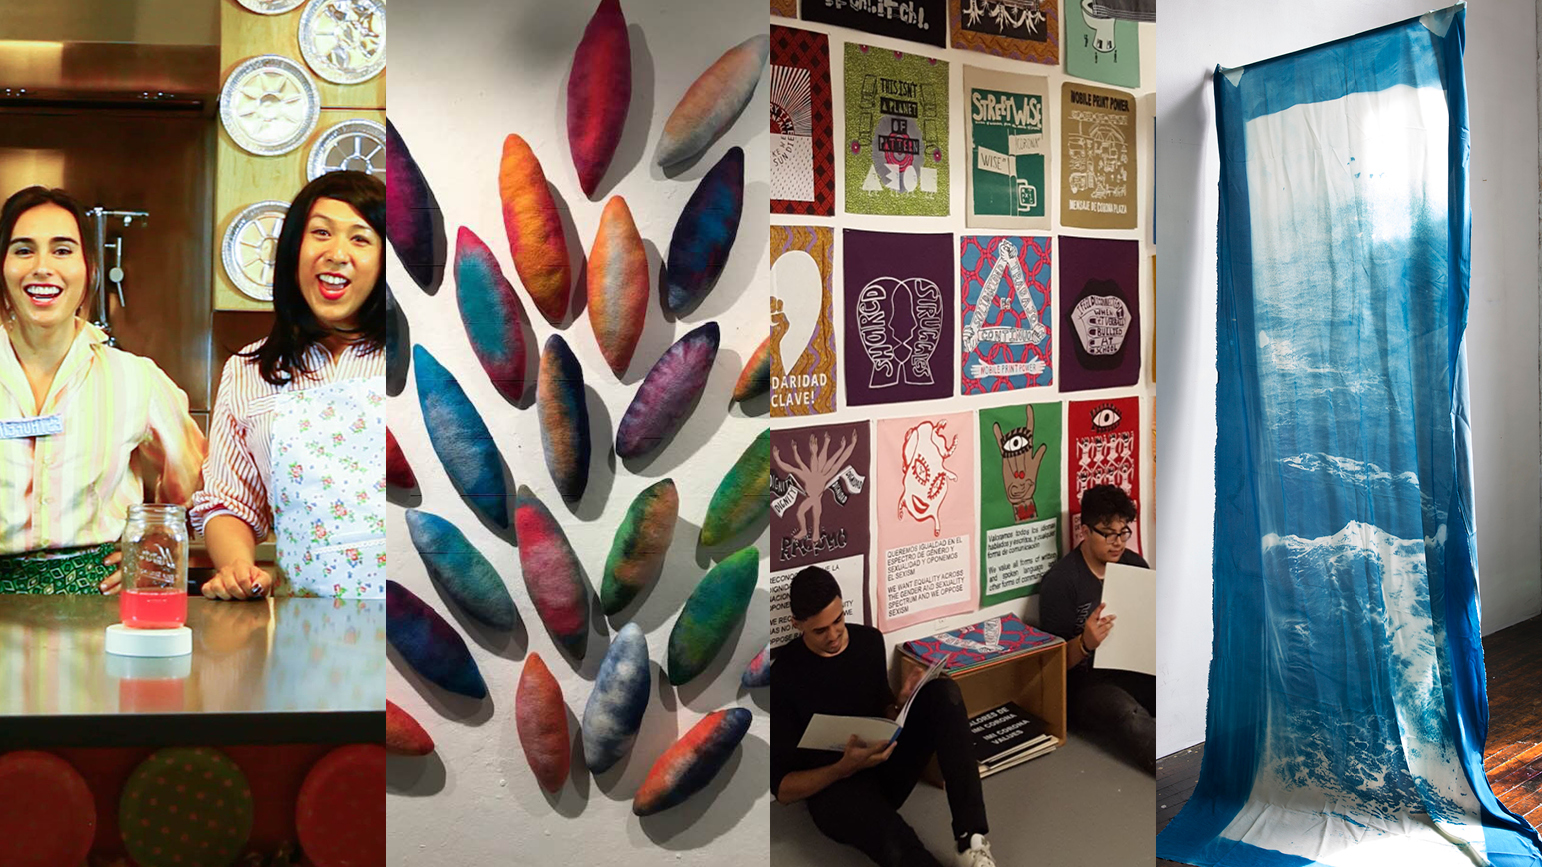 Four images of artworks: 1 - two people smiling and standing at a counter; 2 - several abstract, colorful oval shapes mounted to a wall; 3 - two people sitting in front of a wall covered in fabric banners; 4 - large banner with ocean printed on it.